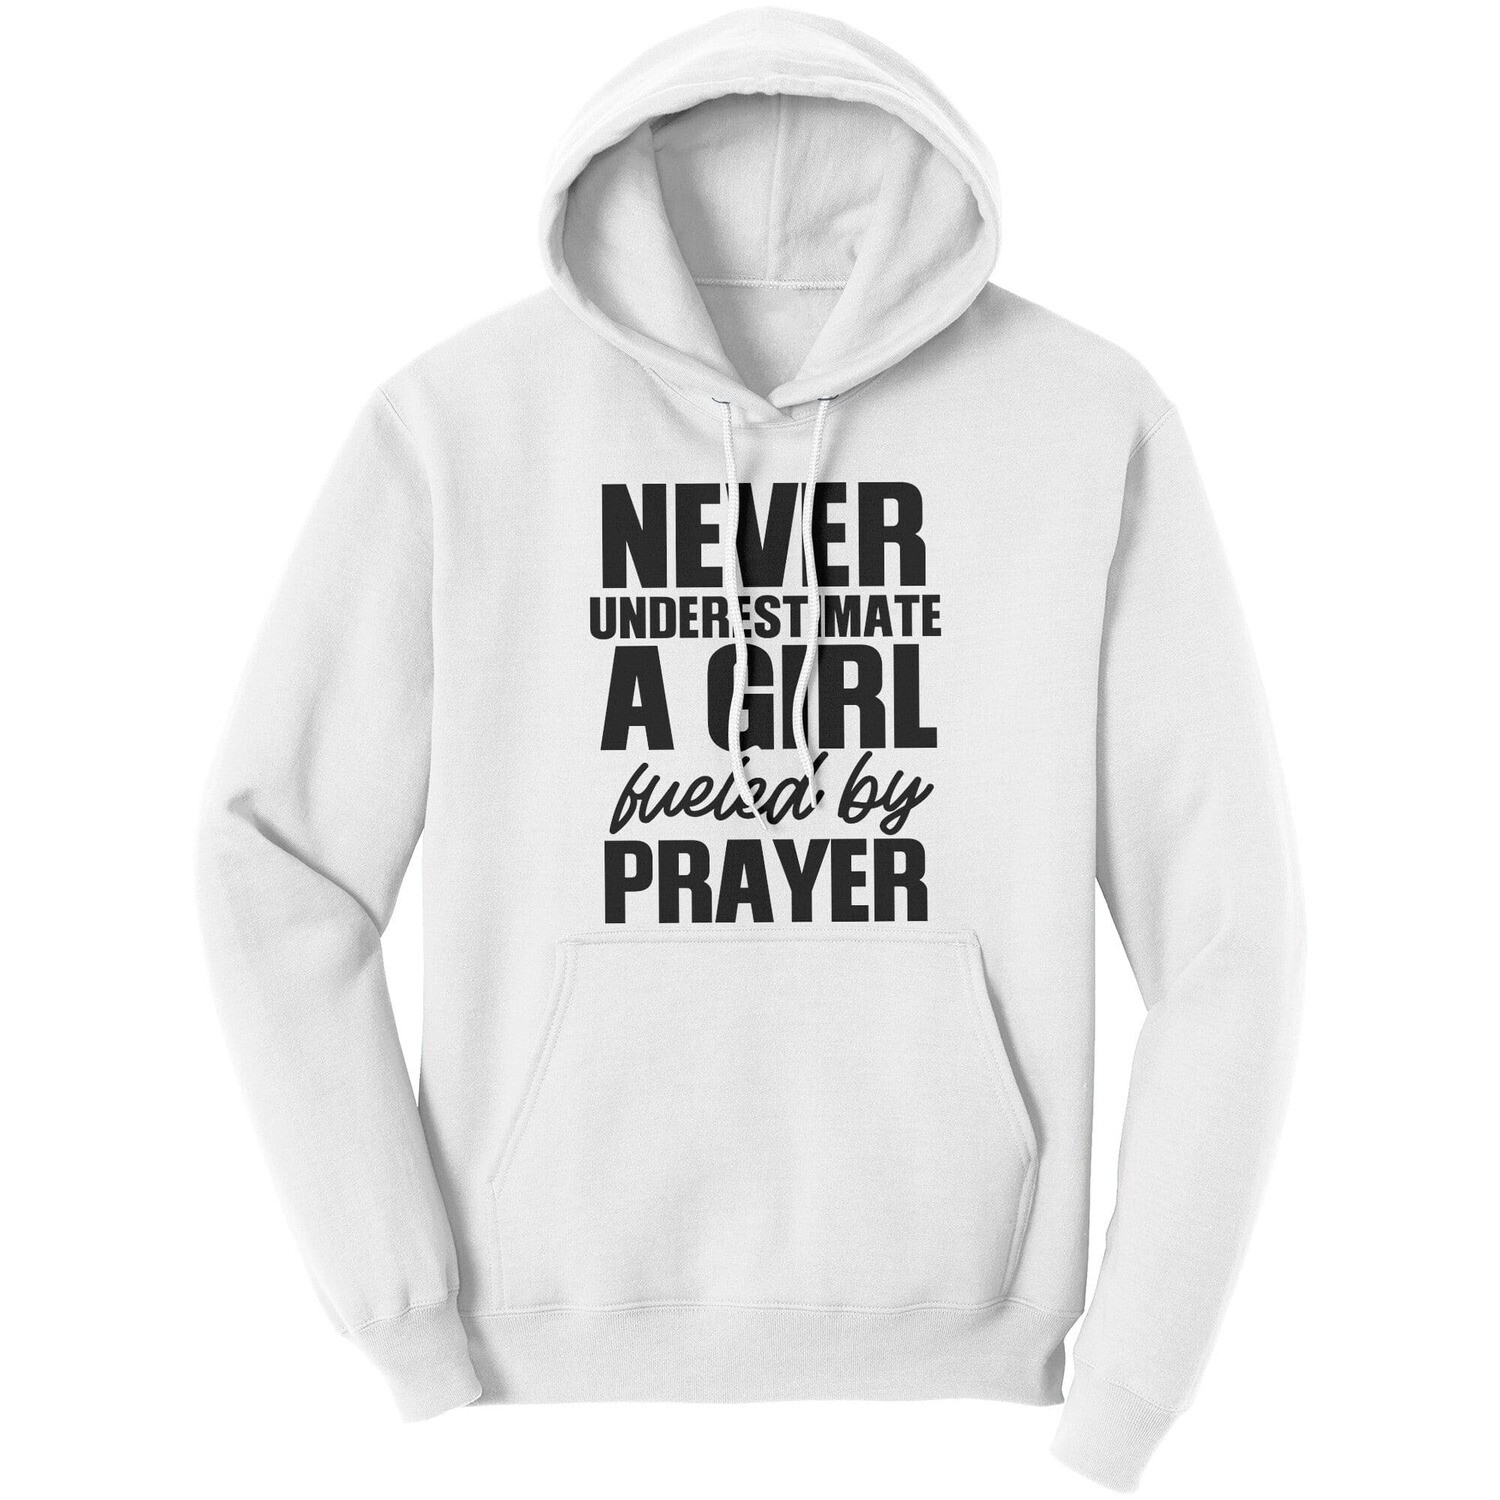 Uniquely You Graphic Hoodie Sweatshirt, Never Underestimate a Girl Fueled by Prayer Hooded Shirt